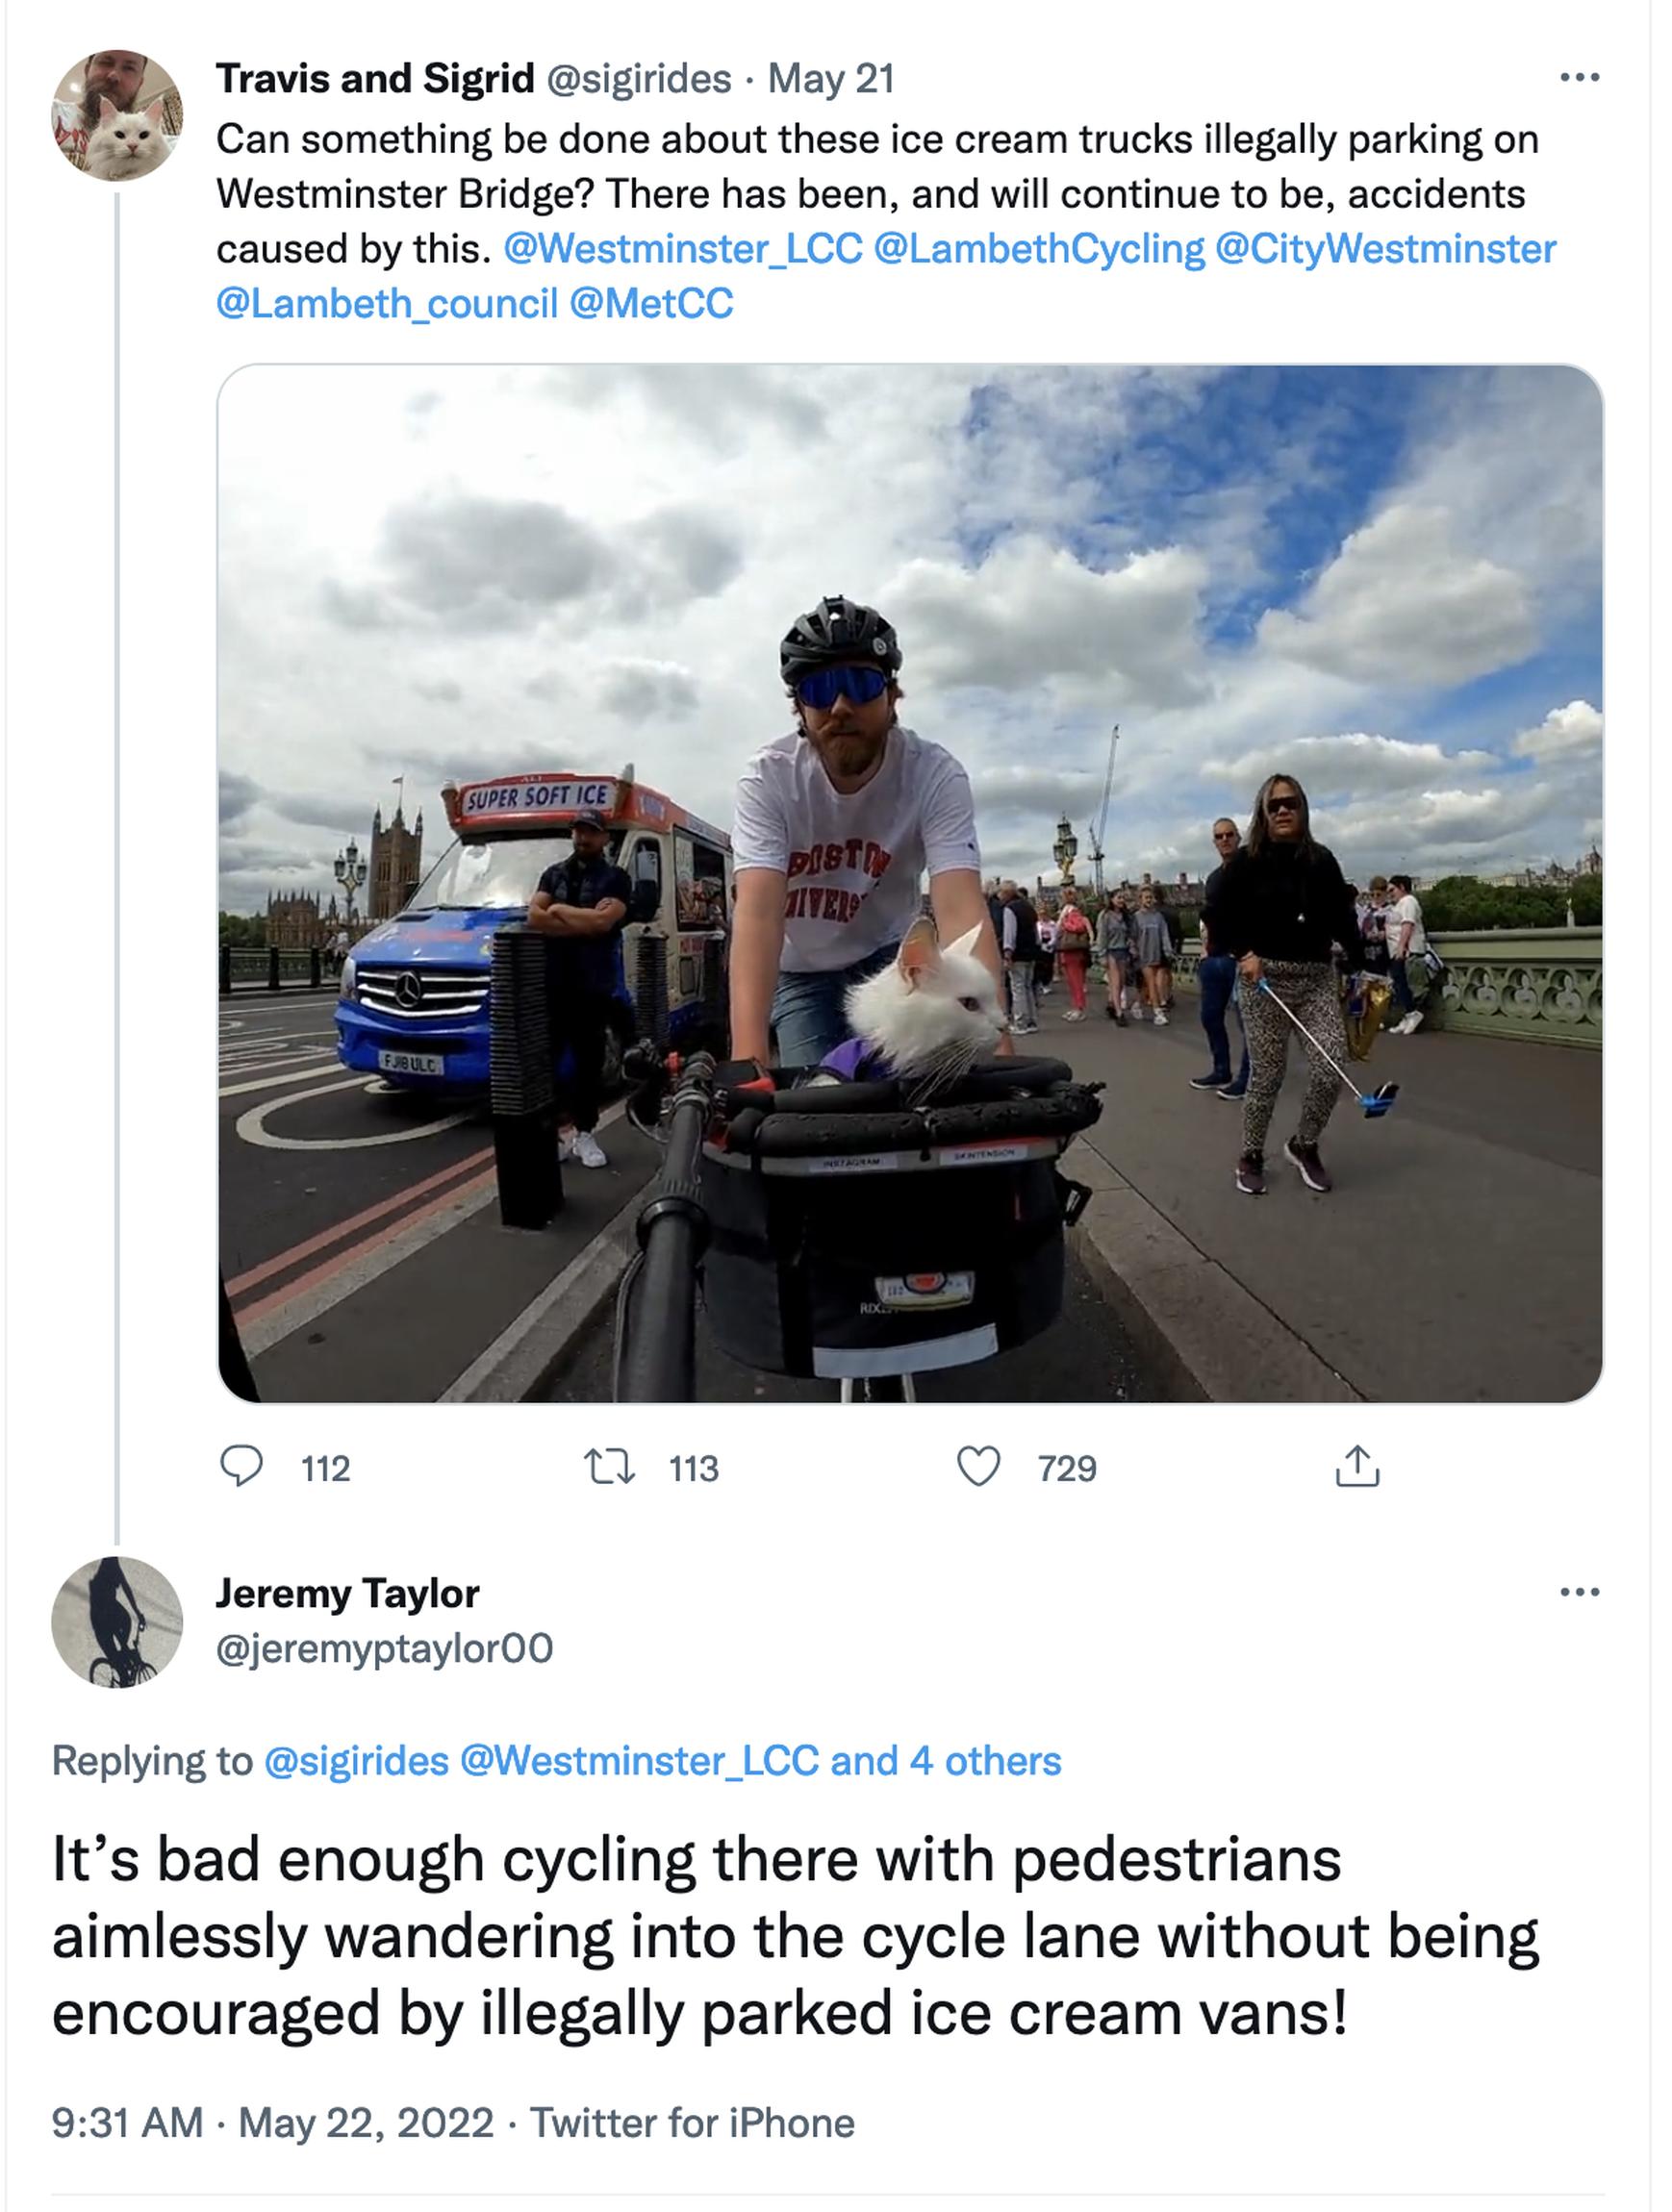 Dangers caused by ice cream vans on Westminster Bridge were flagged up by cyclist Travis Nelson, who travels with his deaf cat Sigrid in a front basket